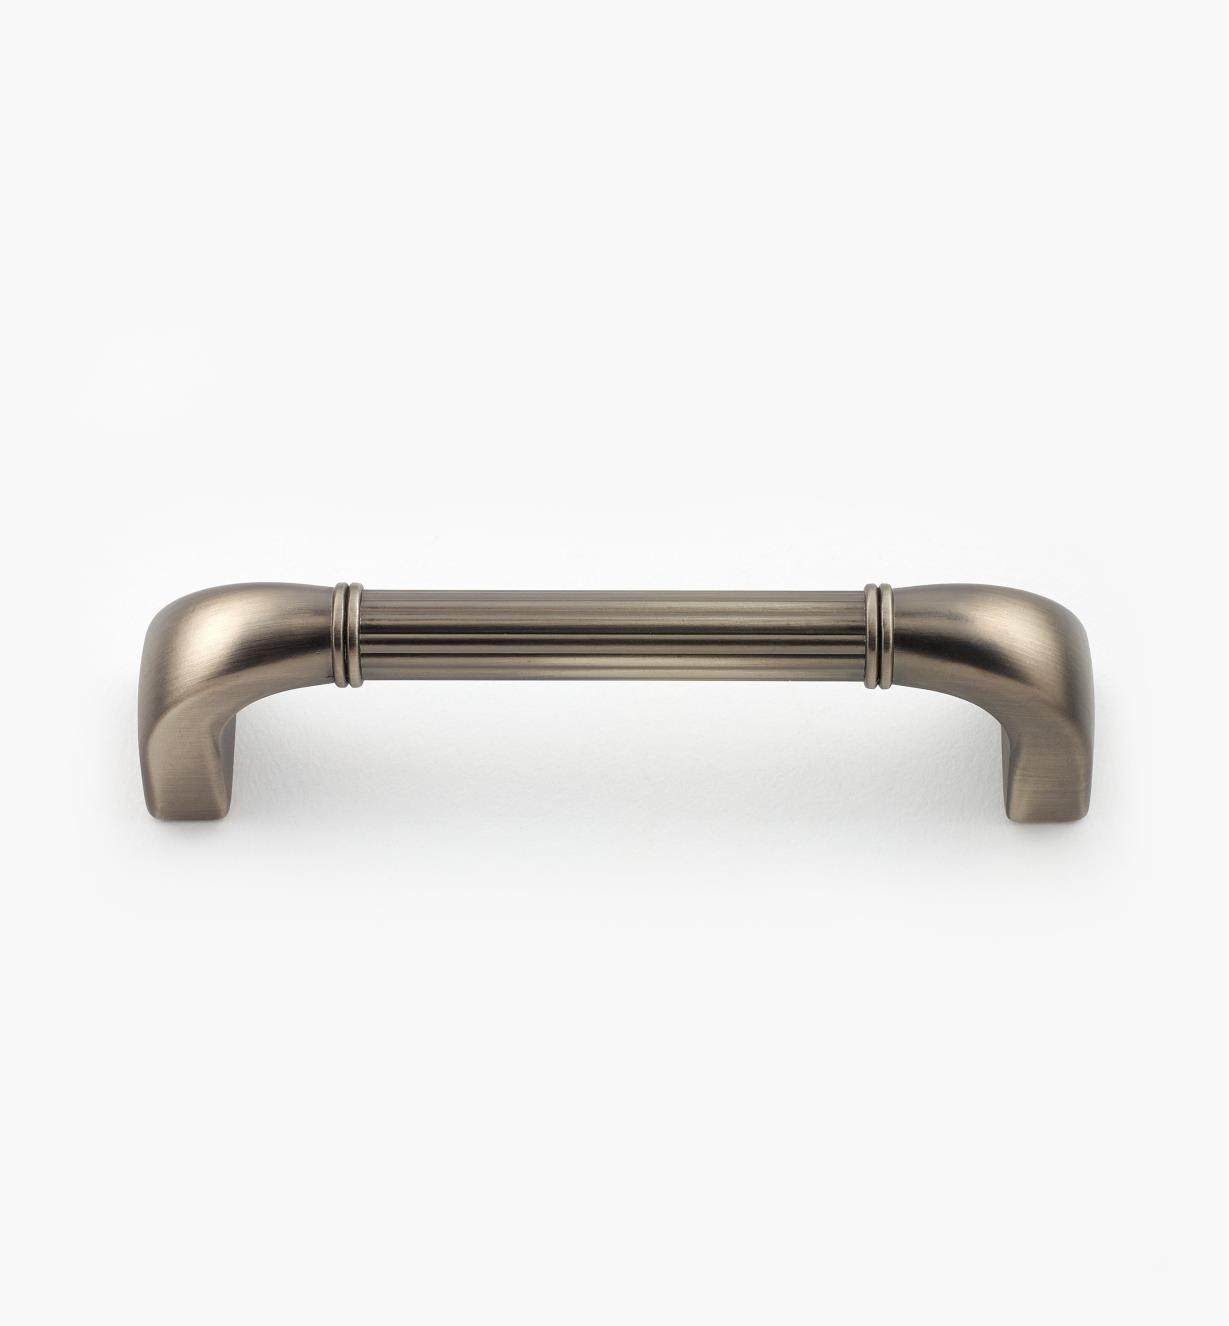 02W4072 - Pewter Handle